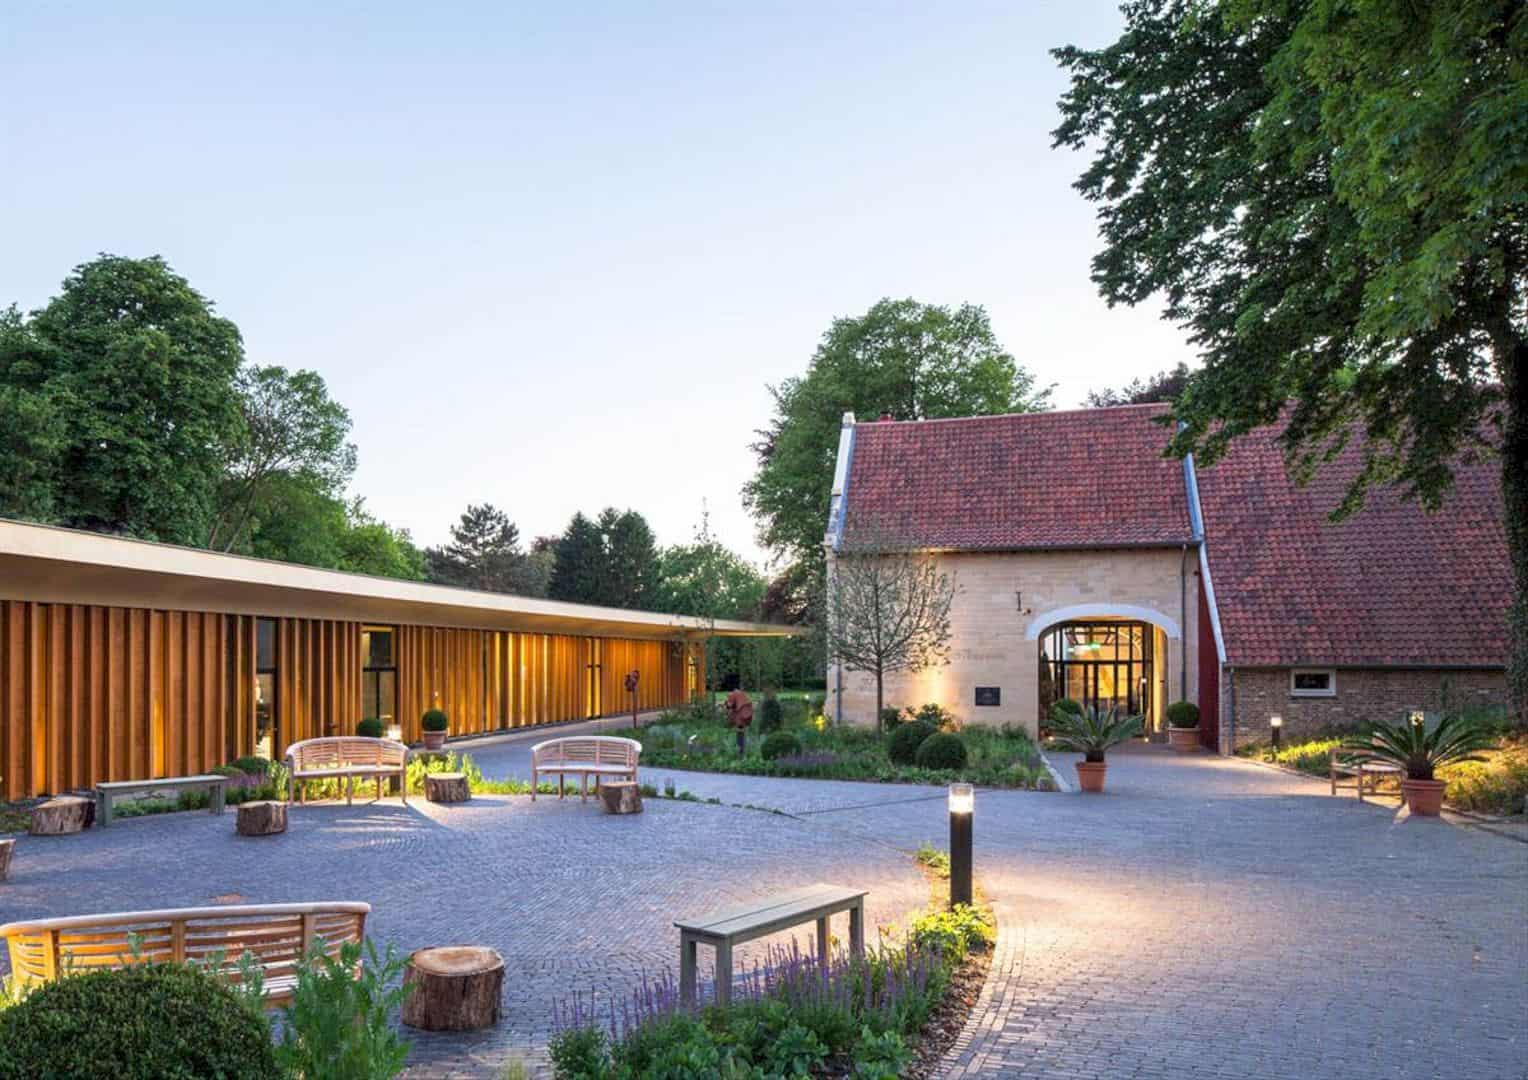 St Gerlach Pavilion Manor Farm An Elegant Pavilion To Complement Historic Buildings In Hilly Limburg Countryside 5